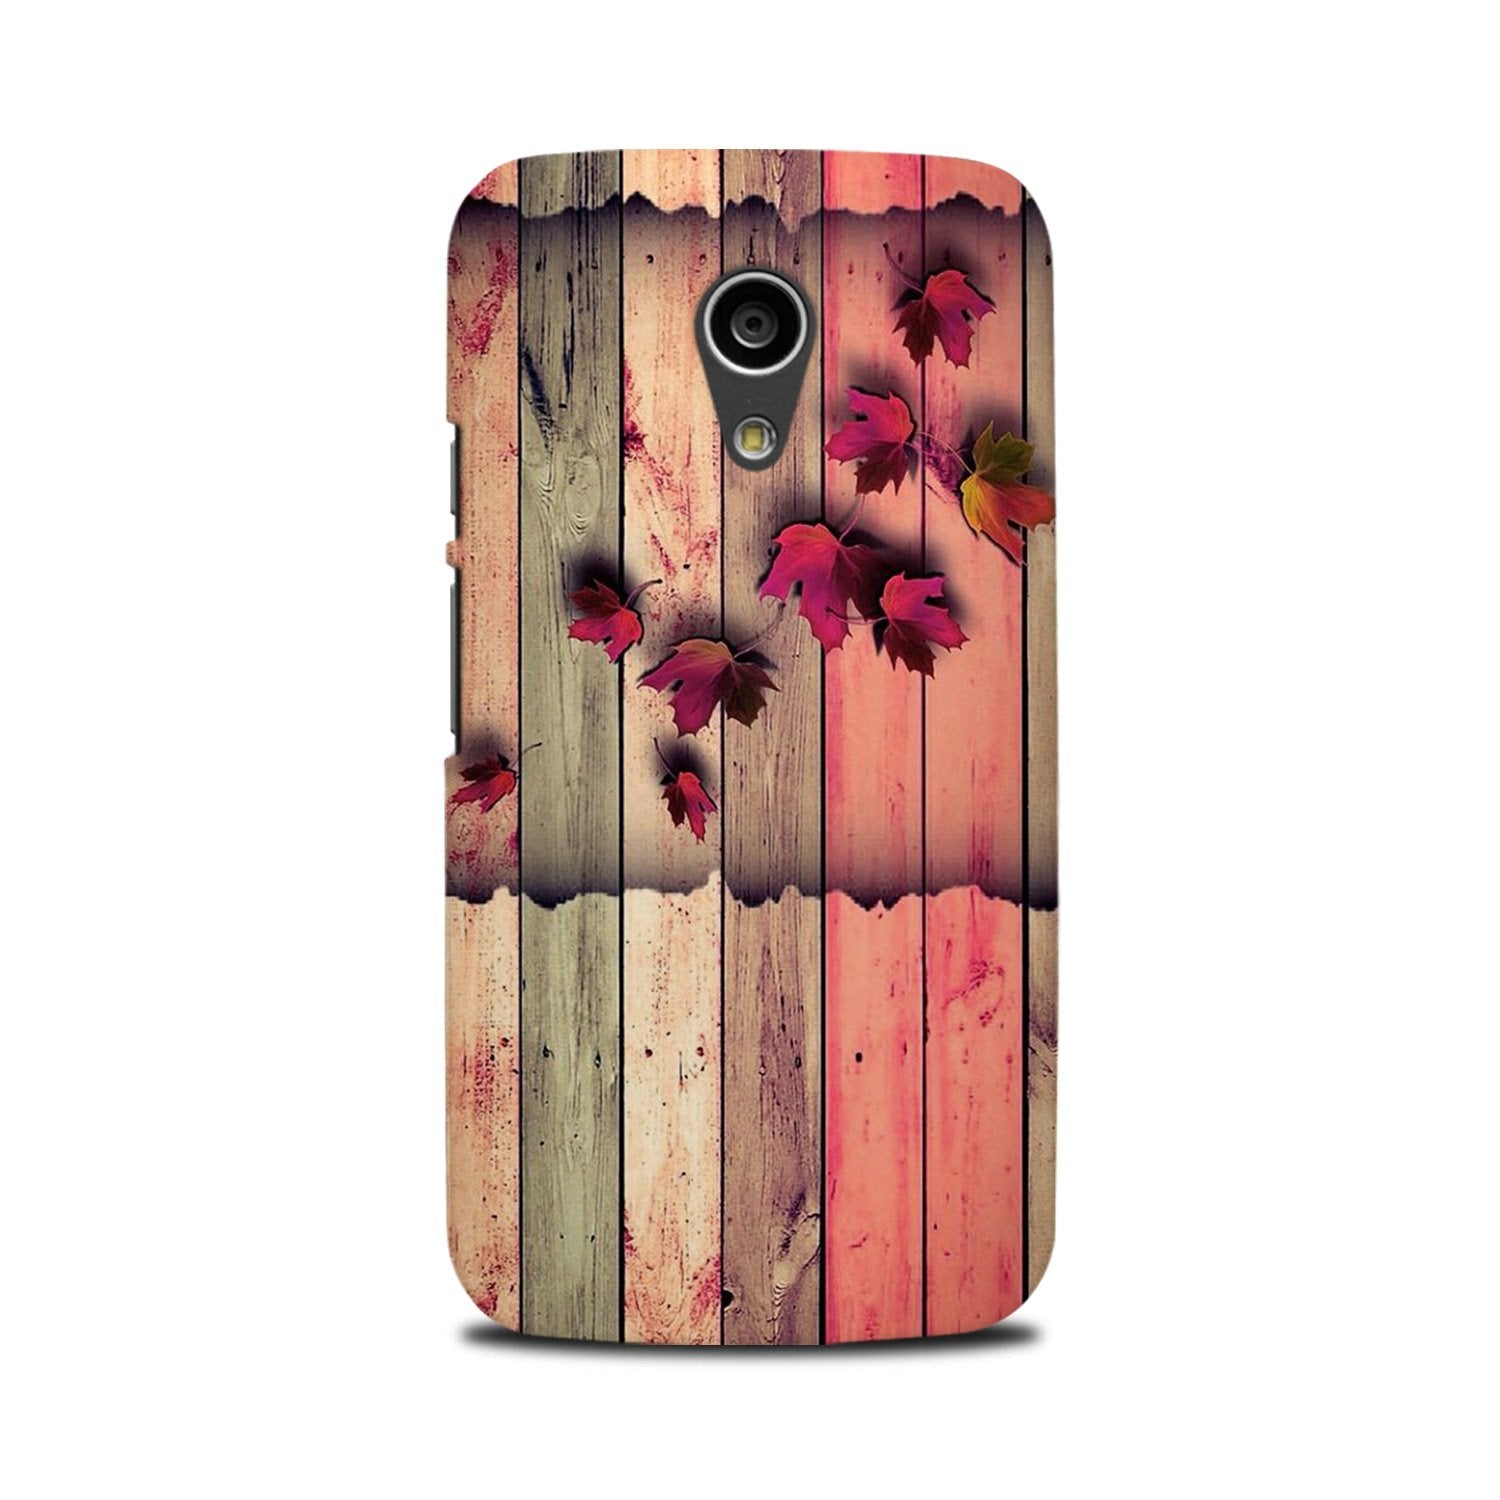 Wooden look2 Case for Moto G2